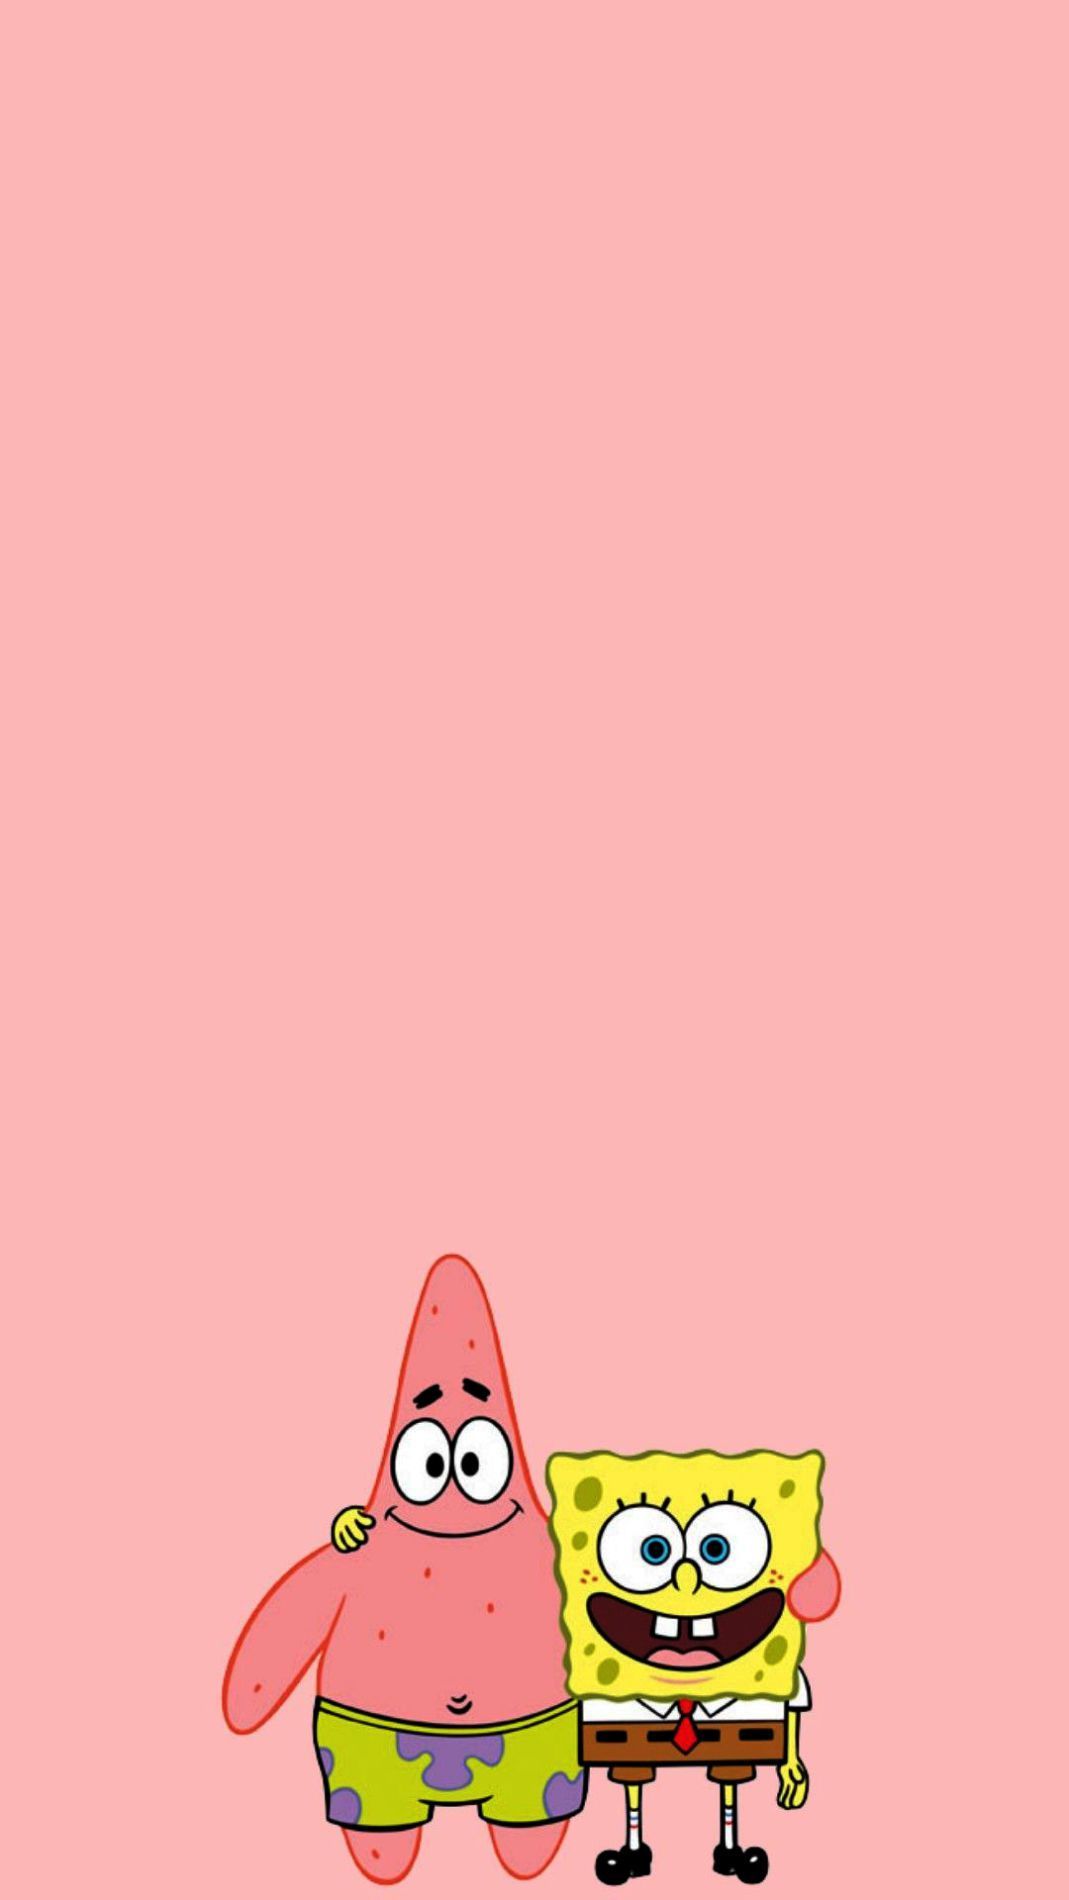 Wallpaper For iPhone Anime enough iPhone Xs Max Jupiter Wallpaper. Cartoon wallpaper iphone, Spongebob wallpaper, Funny iphone wallpaper